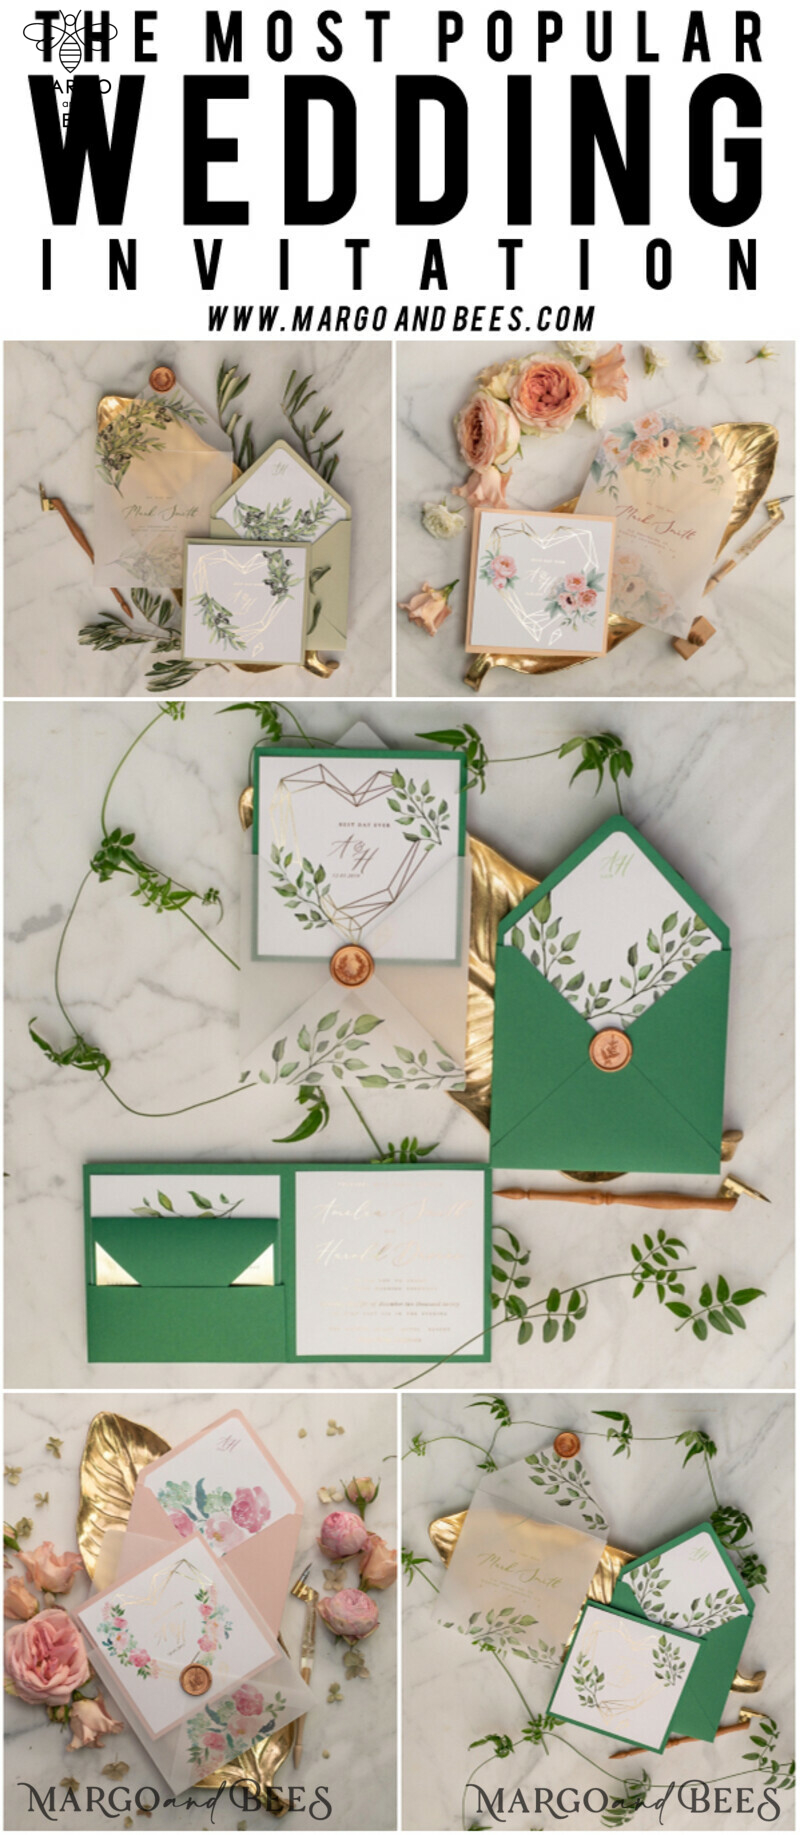 Luxury Gold Foil Wedding Invitations, Glamour Greenery Gold Wedding Invites, Elegant Pocketfold Wedding Cards, Geometric Vellum Wedding Invitation Suite-9